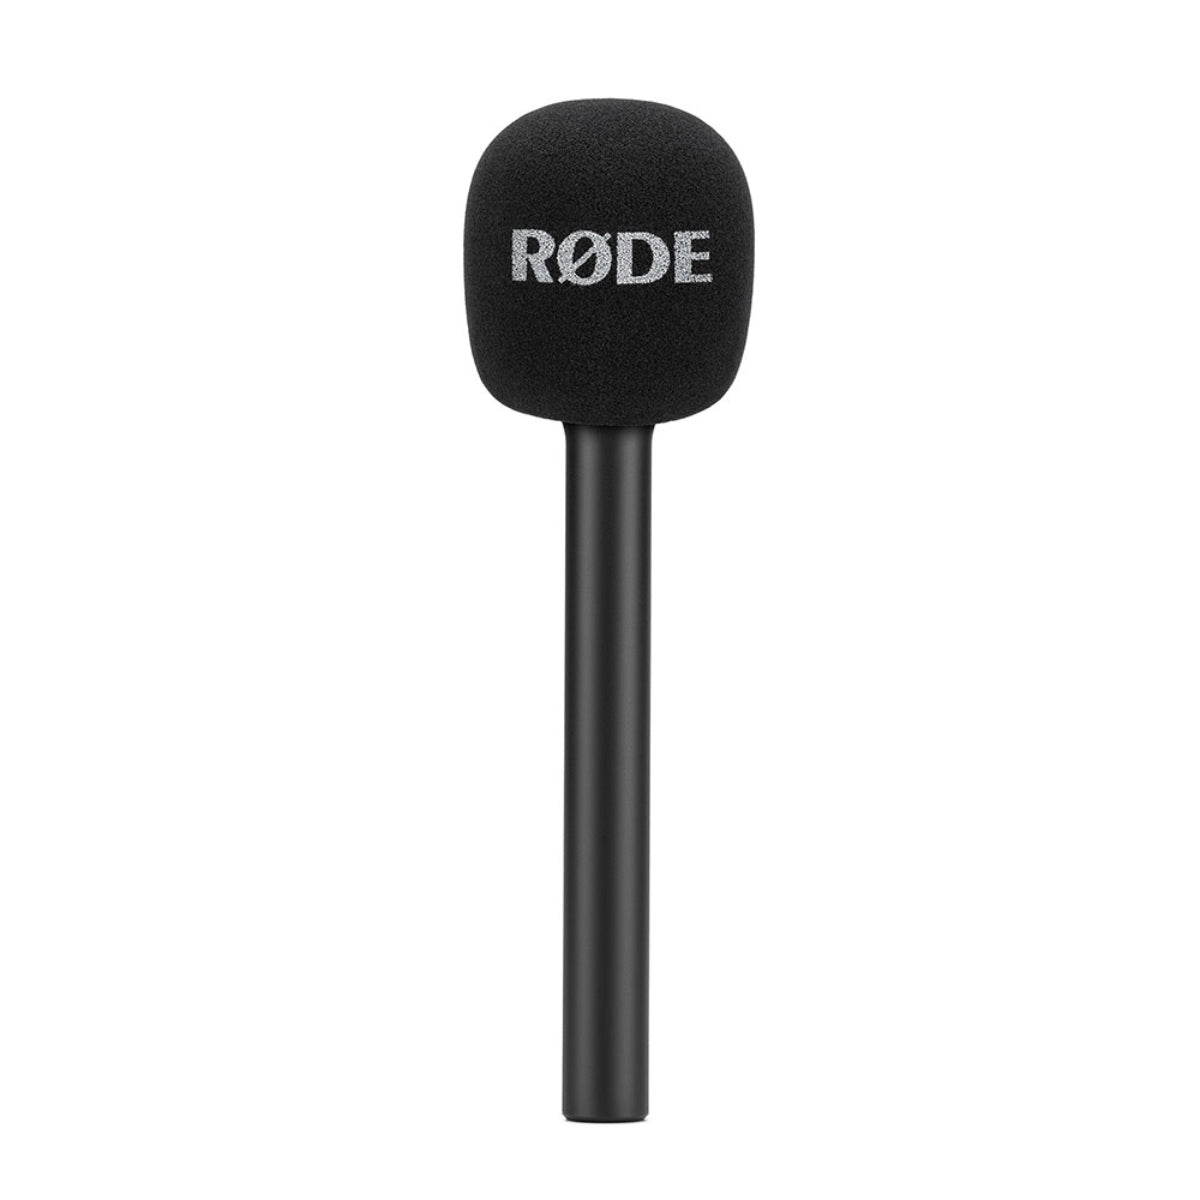 Rode Interview "GO" HANDLE & POP FILTER ATTACHMENT FOR WIRELESS "GO" SYSTEM